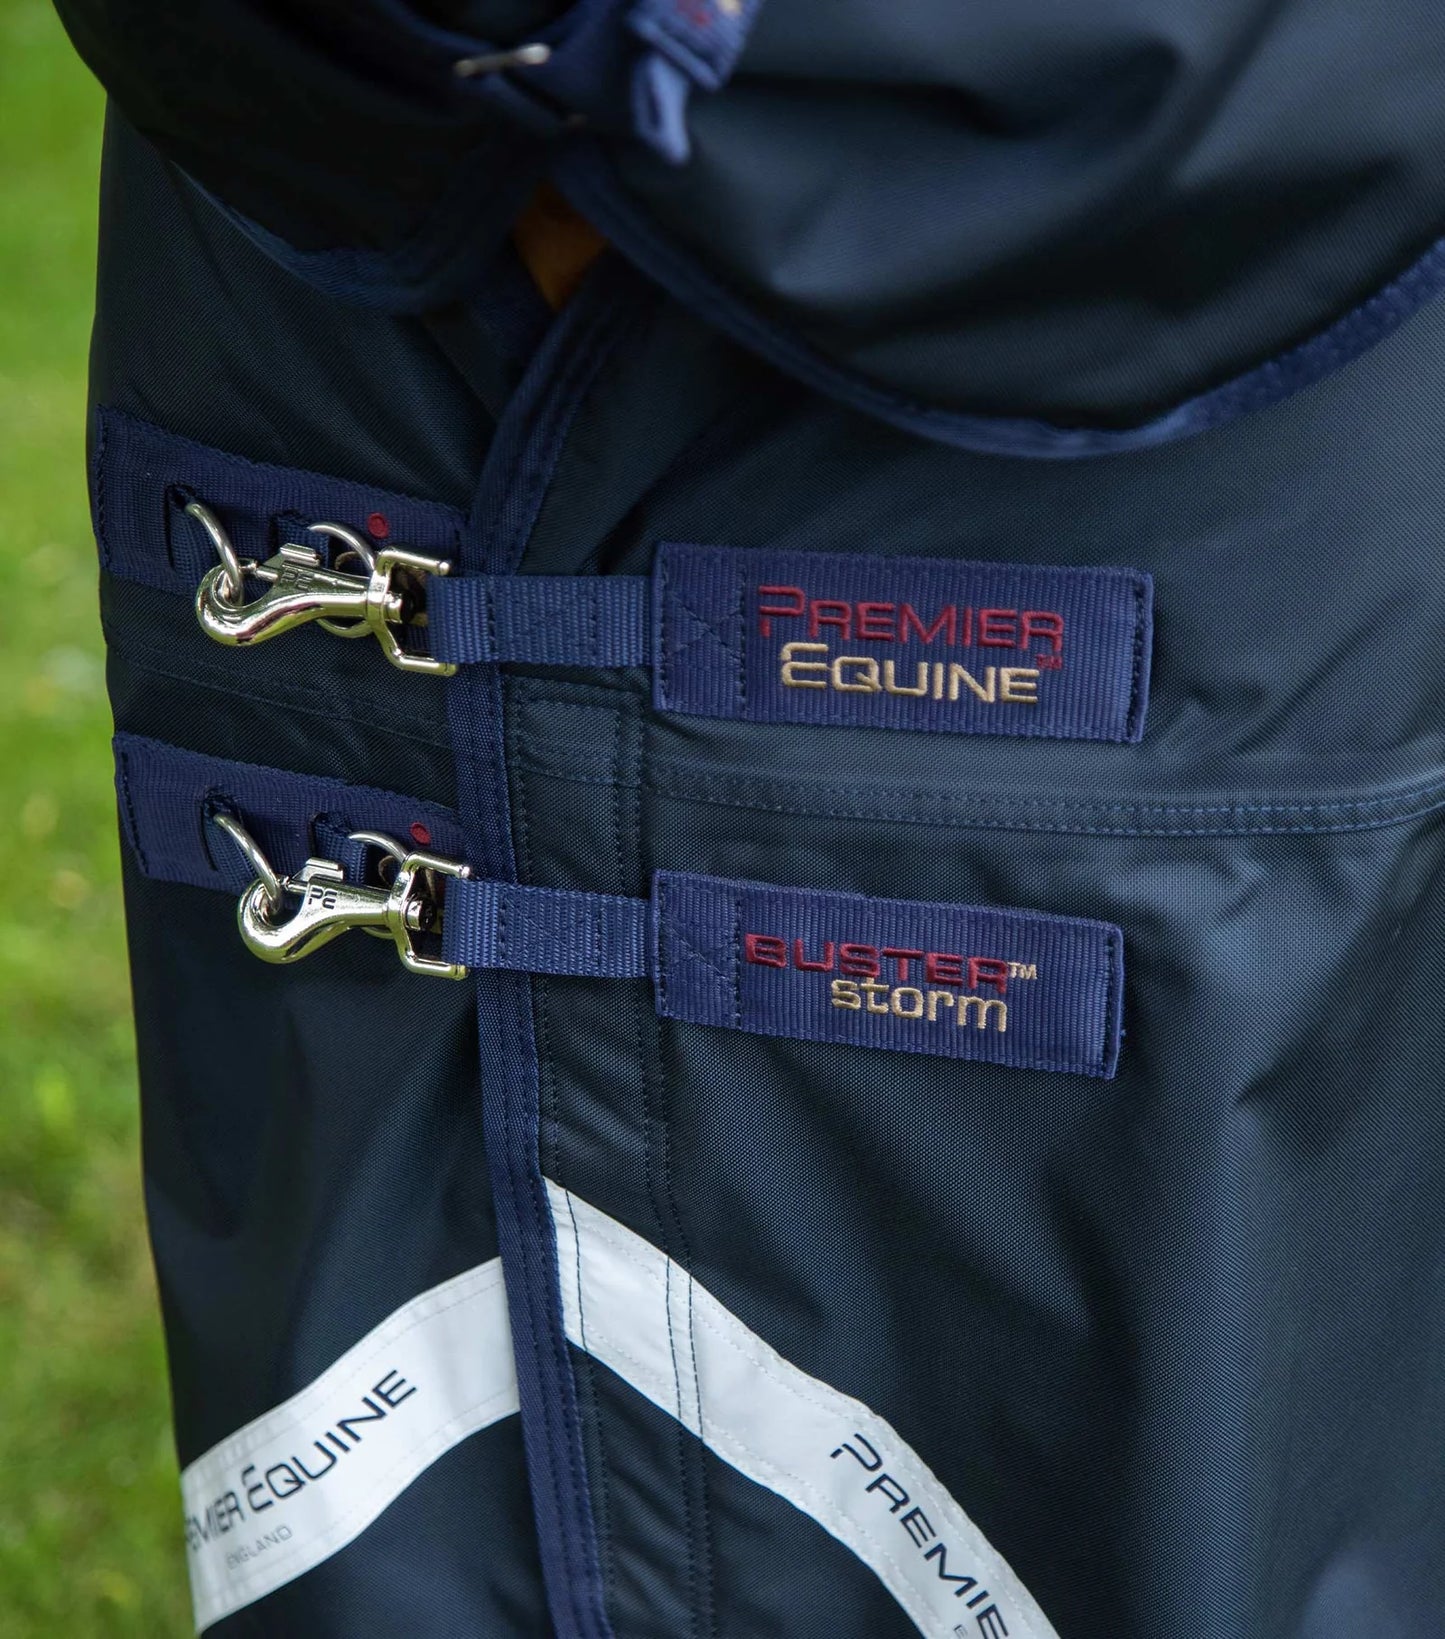 Premier Equine UK Buster Storm 220g Combo Turnout Rug with Classic Neck - Navy